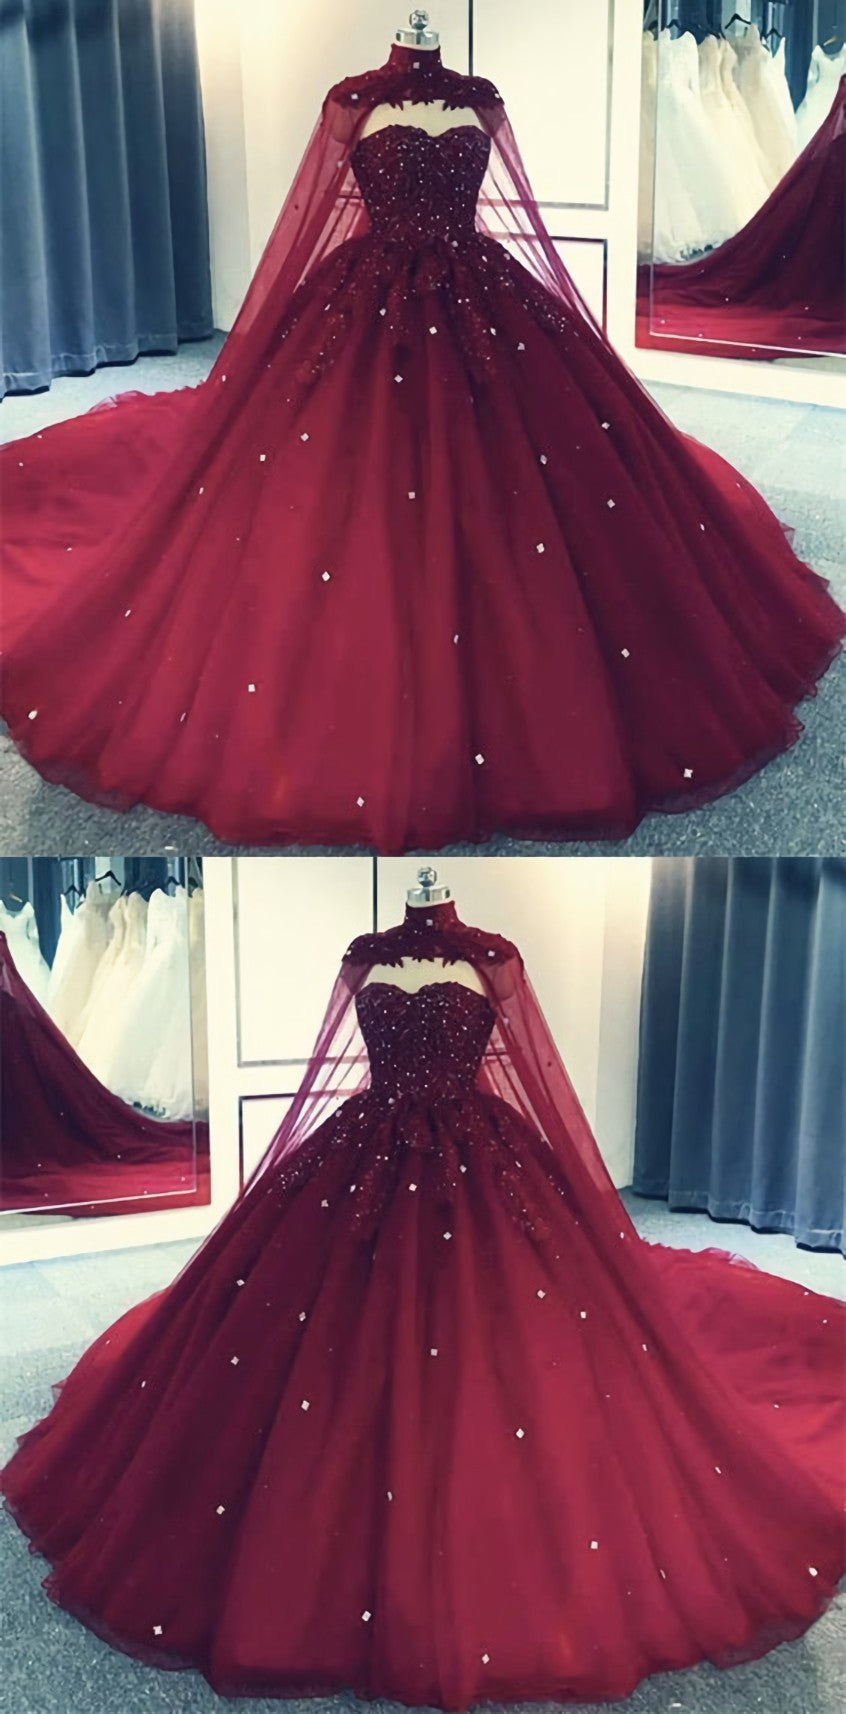 Prom Dressed Short, Glam Ball Gown Quinceanera Dress Lace Applique Beaded Cape, Wine Red Formal Dress Party Gowns